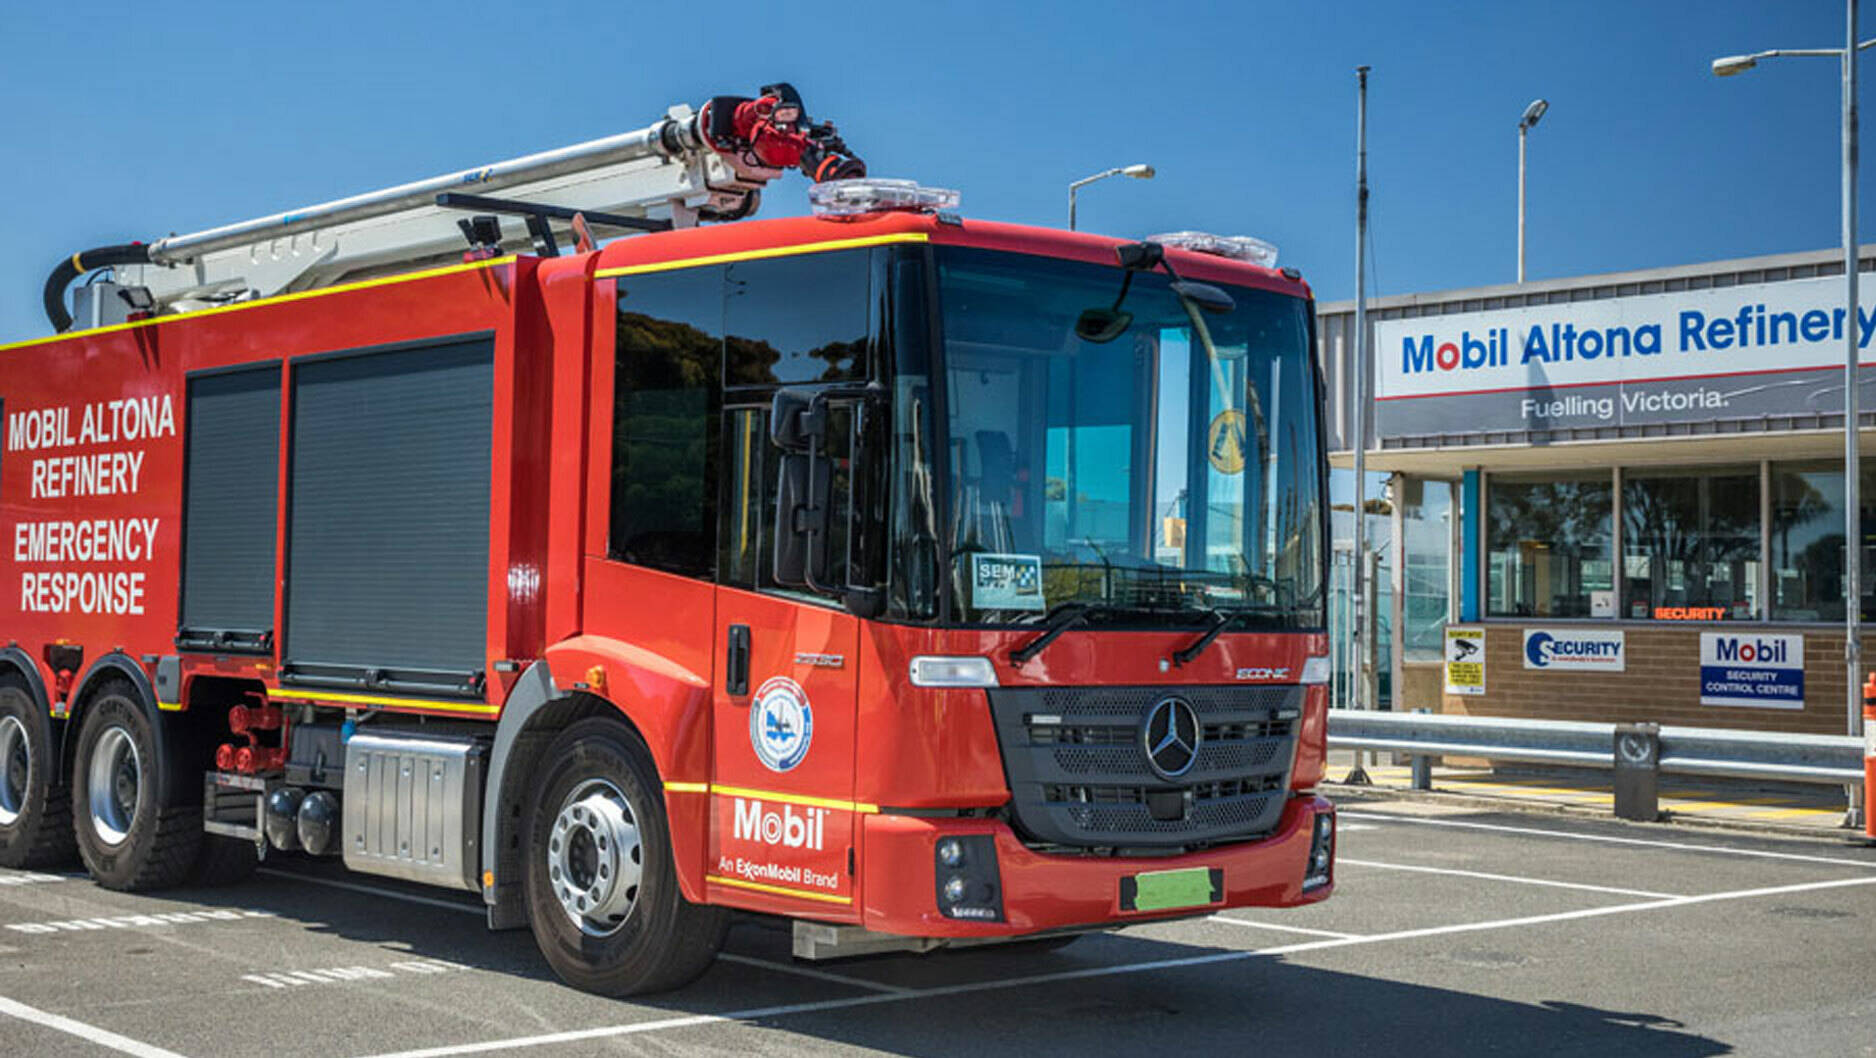 Image Photo—The new fire truck will significantly bolster Altona Refinery's emergency response capabilities.